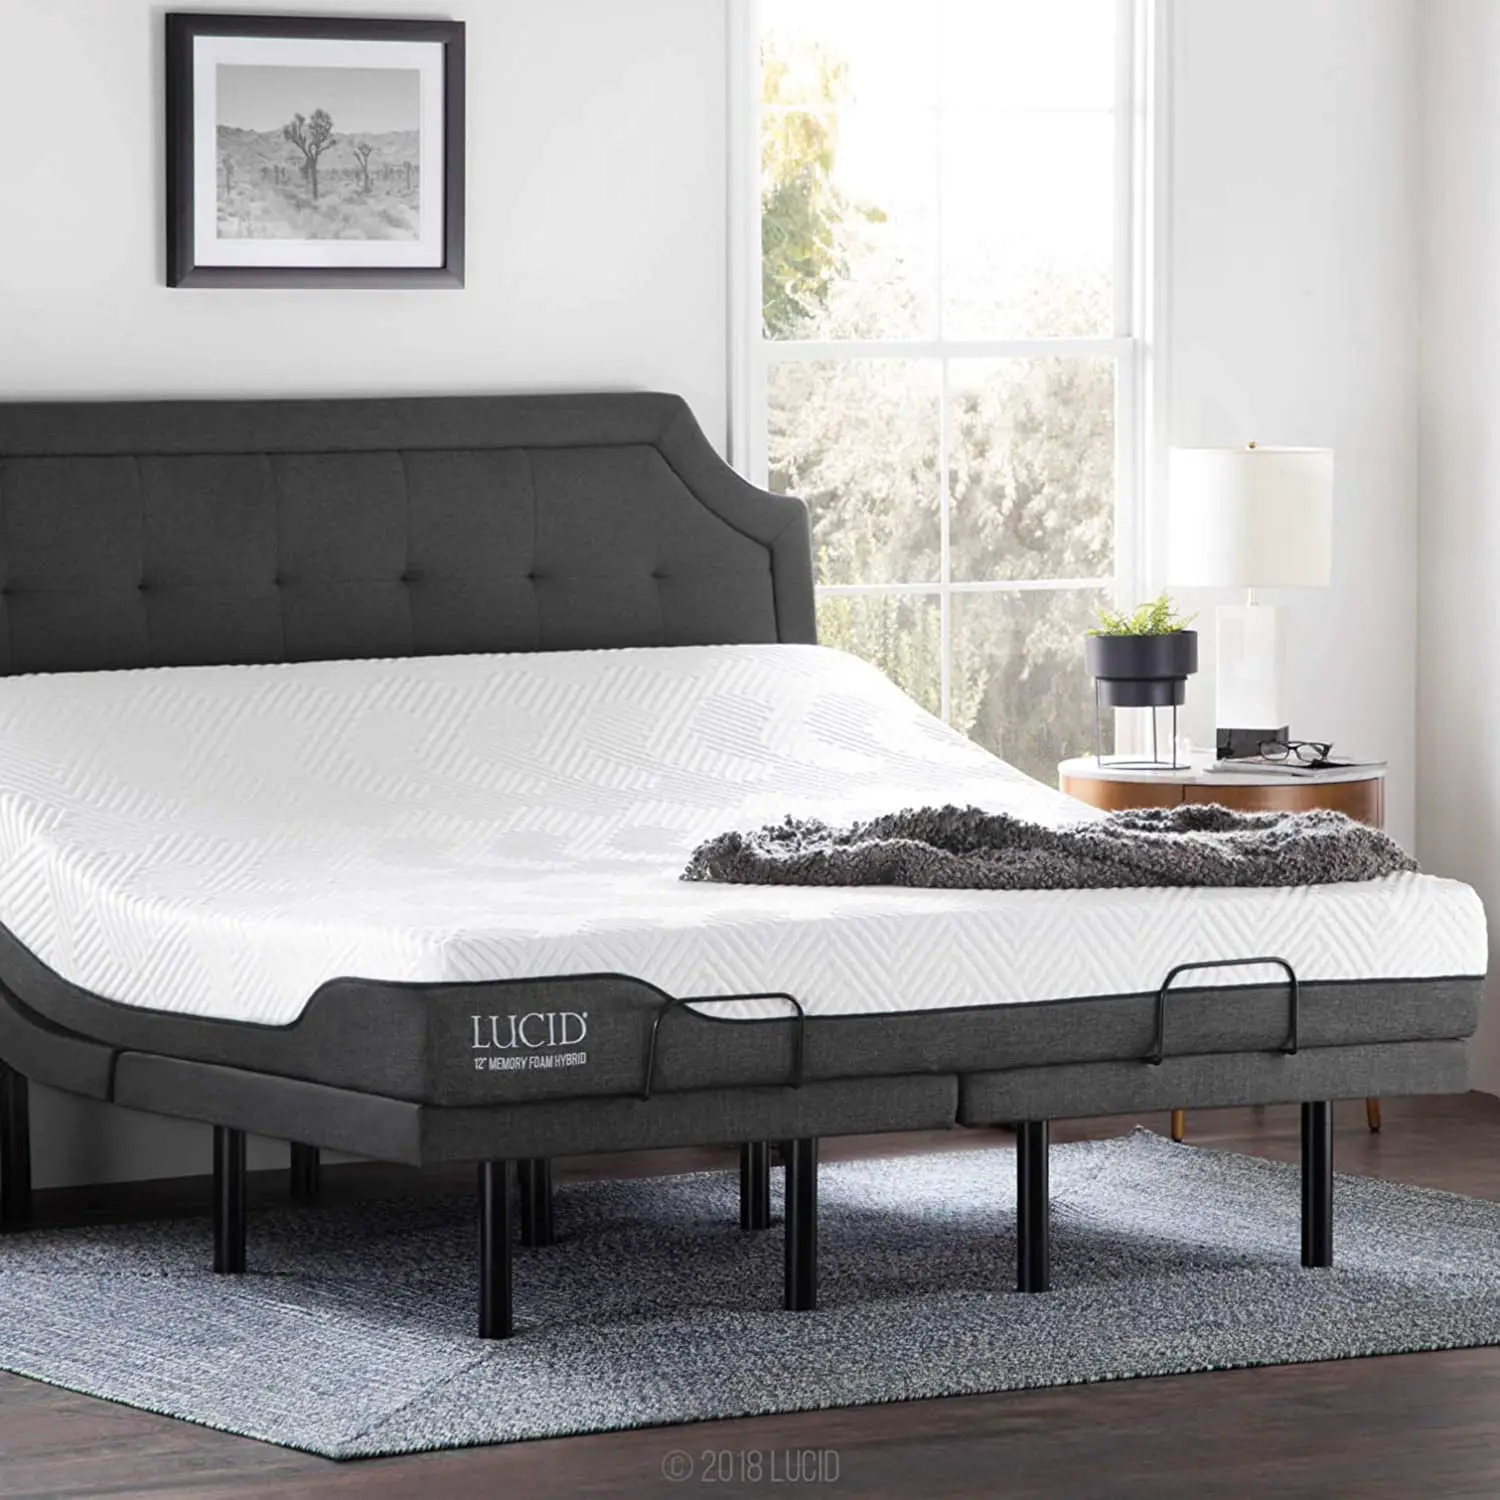 Can A Hybrid Mattress Be Used On An Adjustable Bed